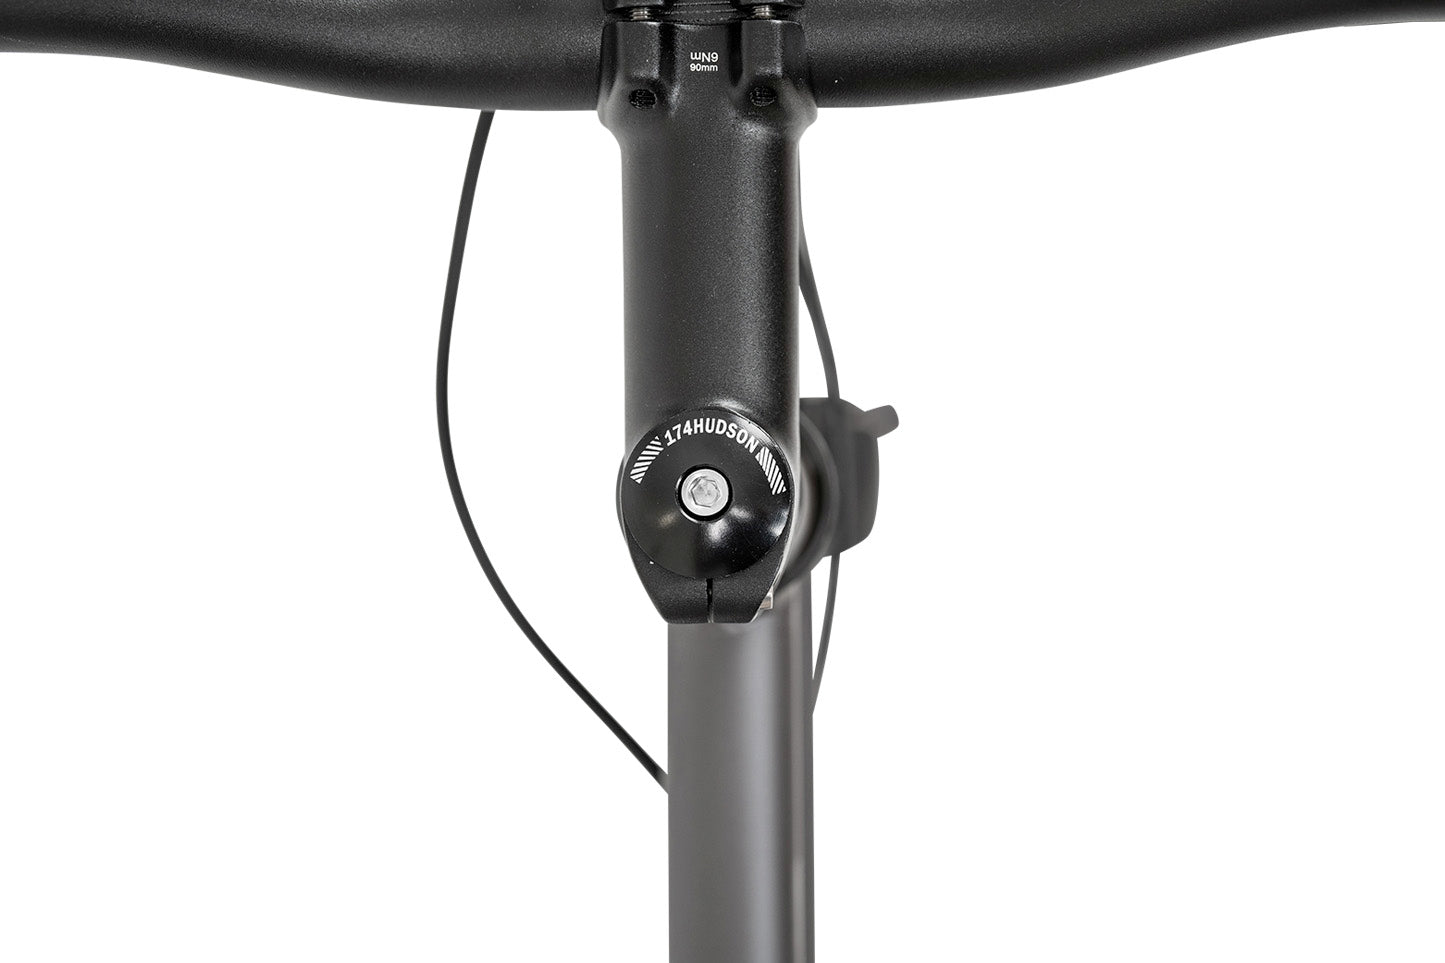 PRIORITY EIGHT – Priority Bicycles